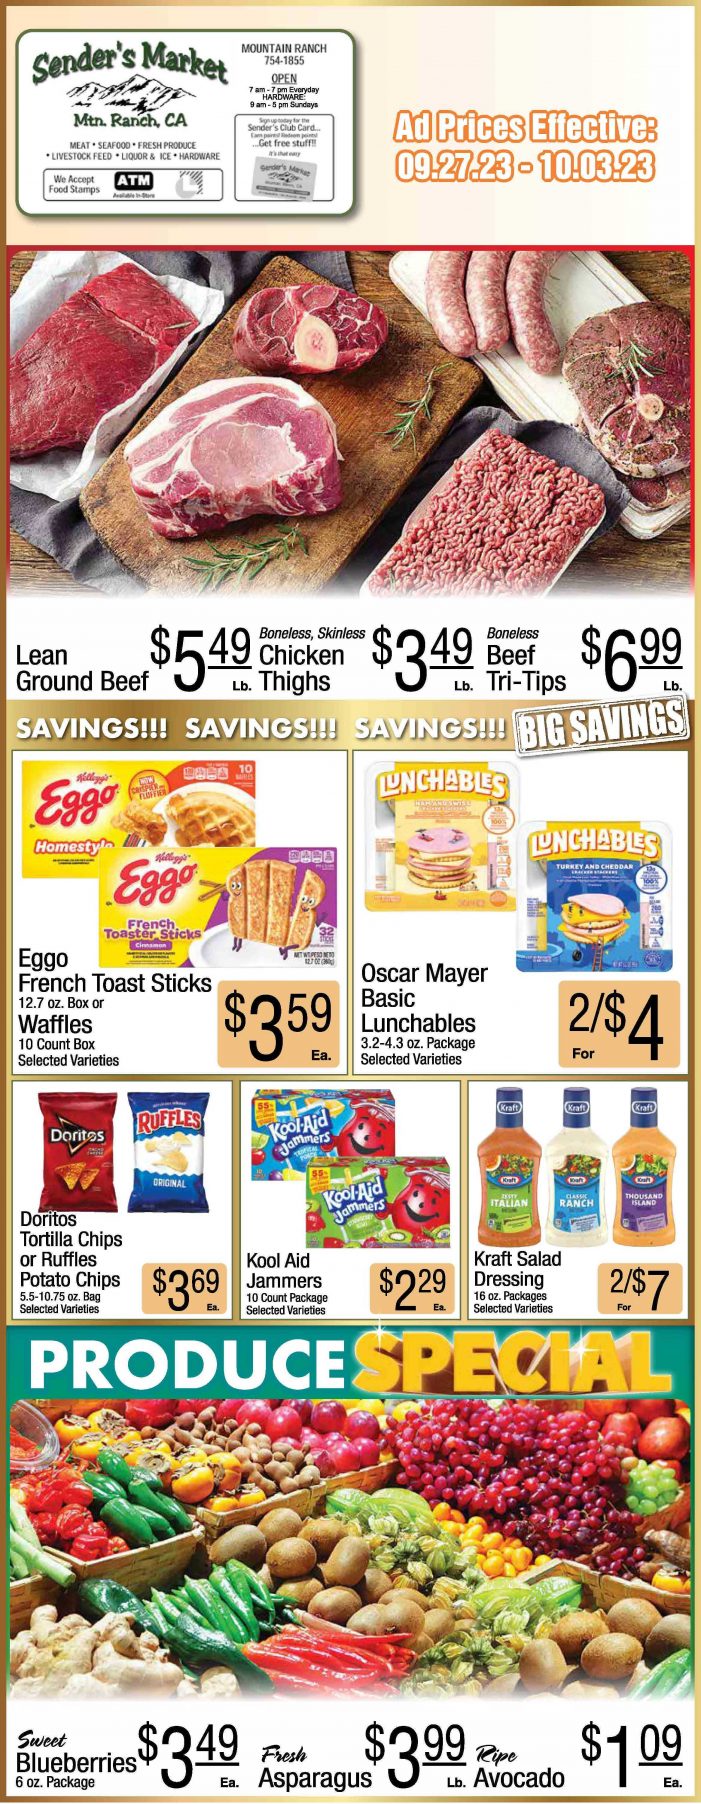 Sender’s Market Weekly Ad & Grocery Specials Through October 3! Shop Local & Save!!